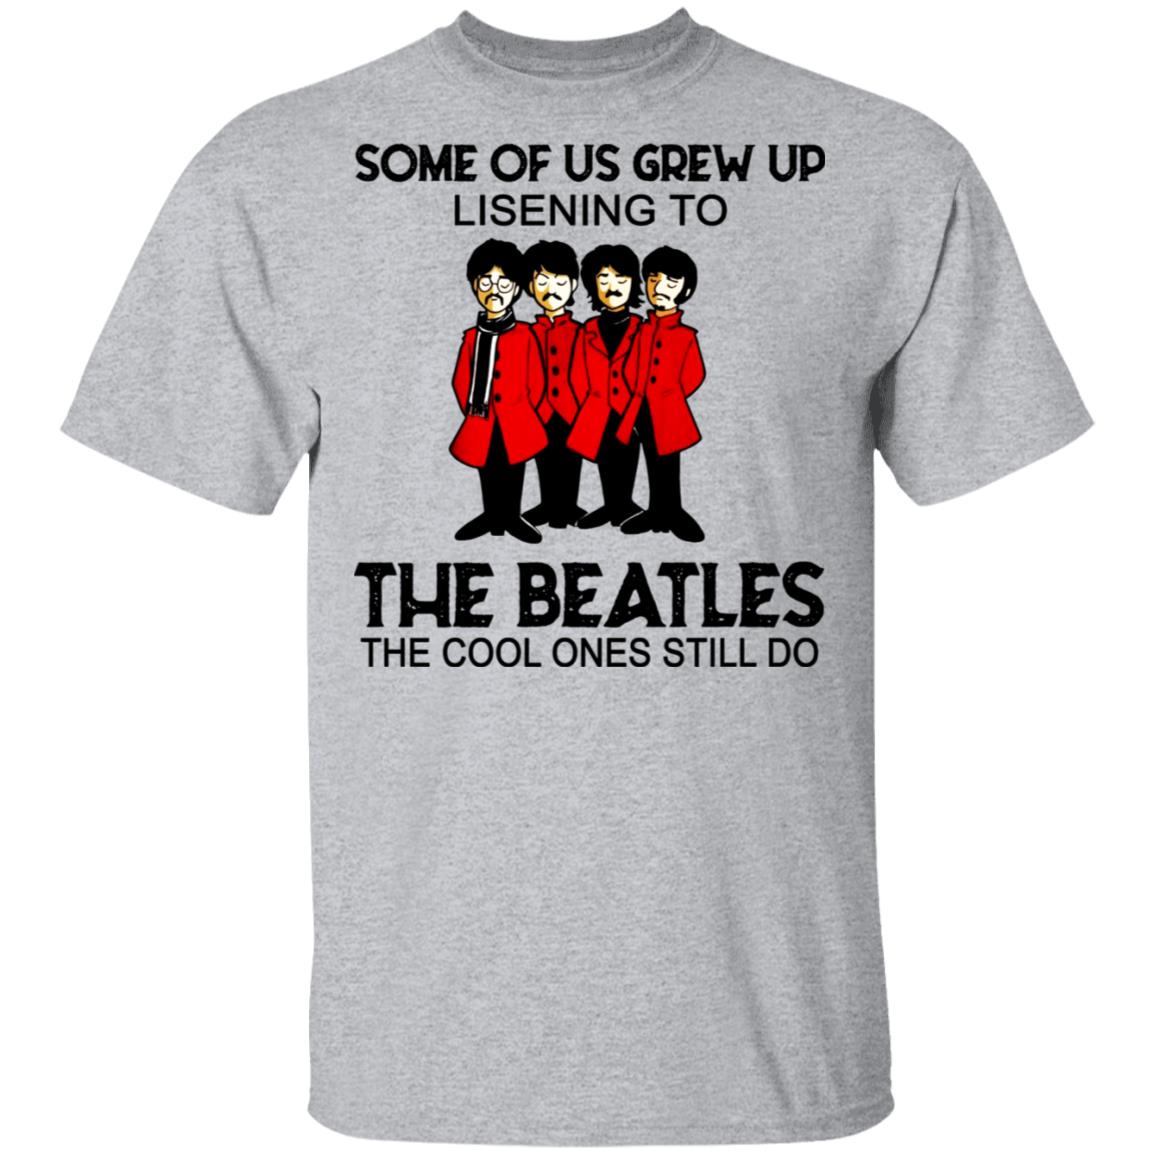 At accelerere Demonstrere En sætning Some Of Us Grew Up Listening To The Beatles T-Shirts, Hoodies